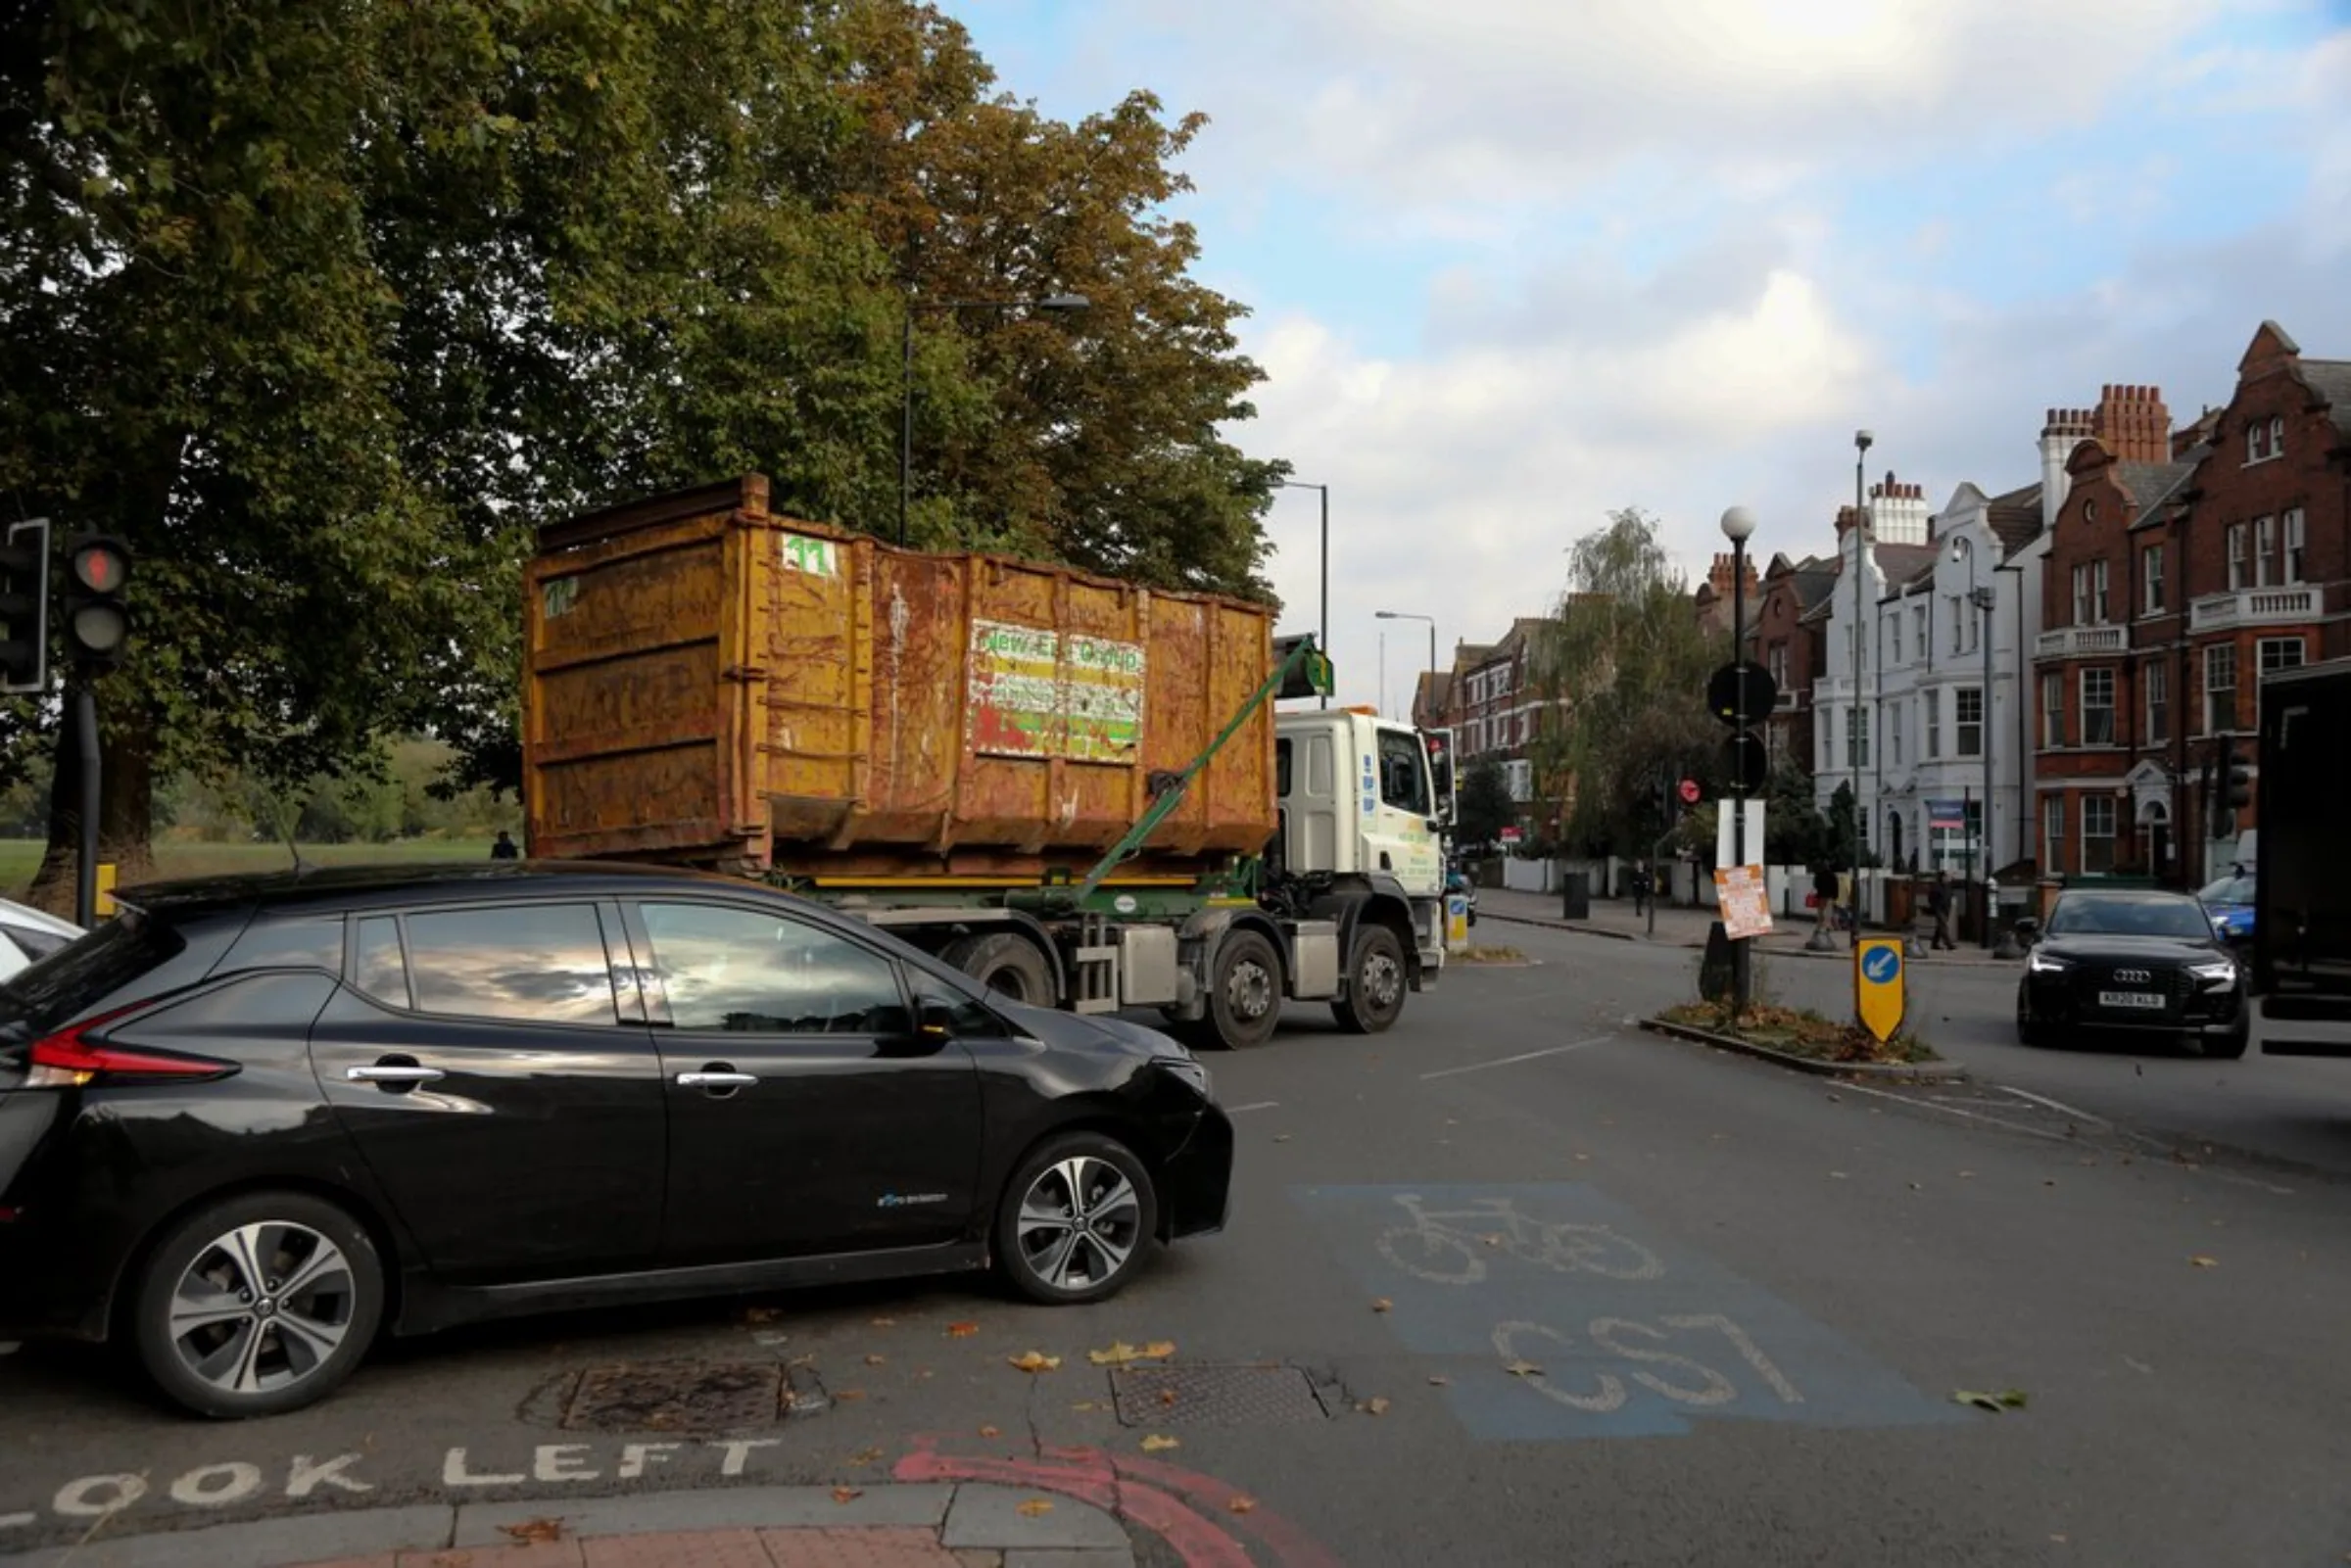 An electric car navigates a busy road junction in Clapham South, a south London district known for its challenging-to-retrofit Victorian terraced houses in London, England, on October 19, 2021